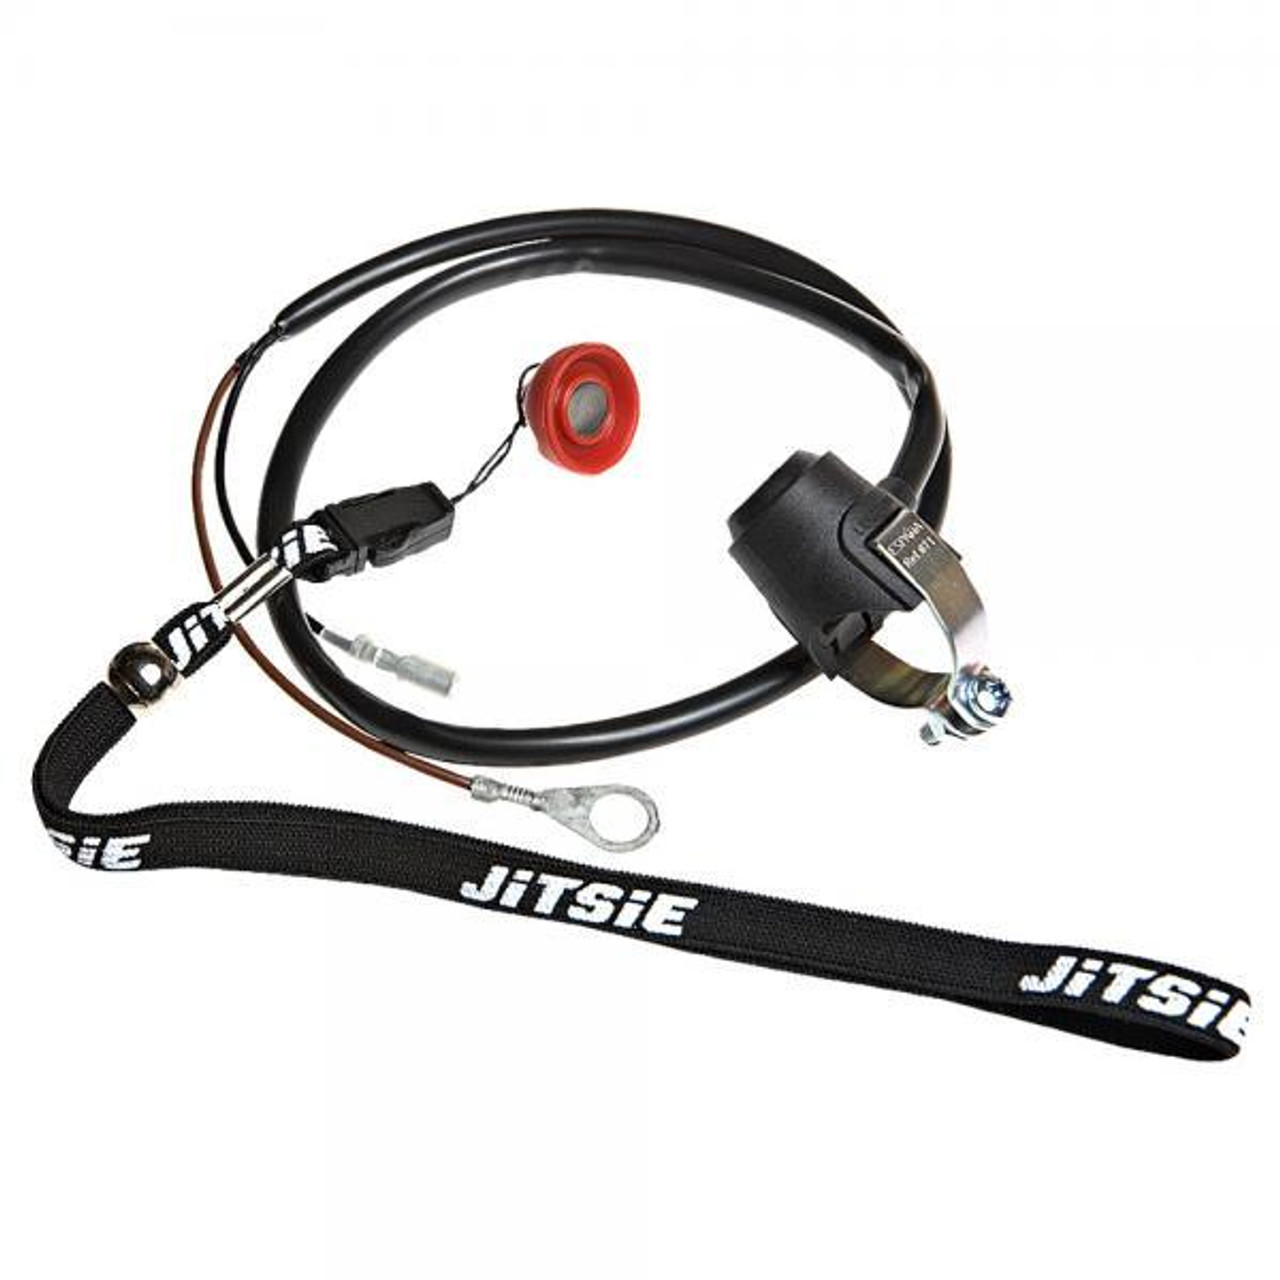 Magnetic kill button with lanyard, black